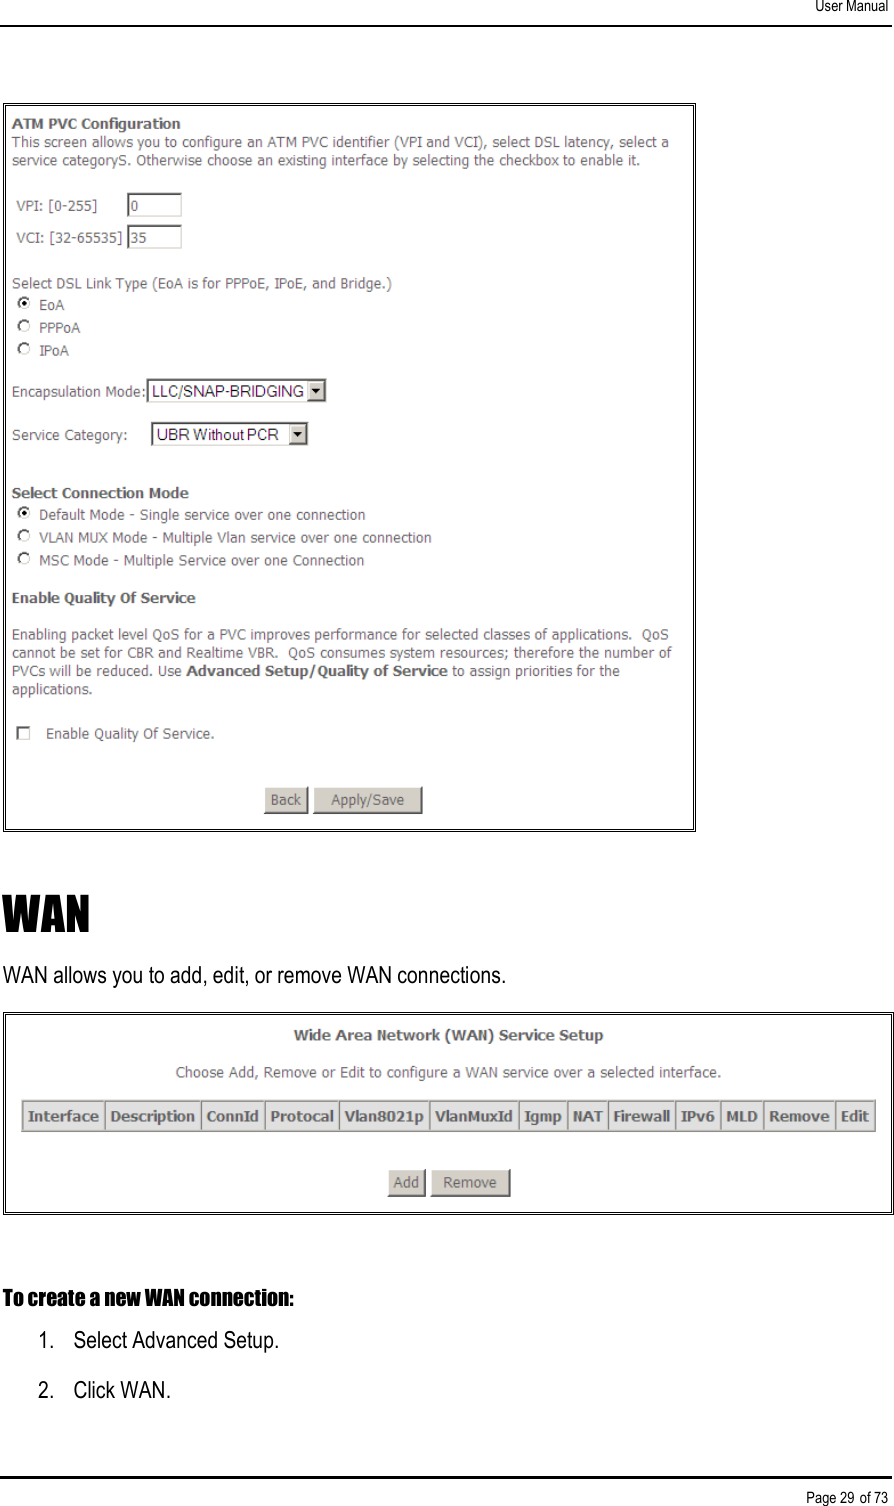 User Manual Page 29 of 73  WAN WAN allows you to add, edit, or remove WAN connections.  To create a new WAN connection: 1.  Select Advanced Setup. 2.  Click WAN. 